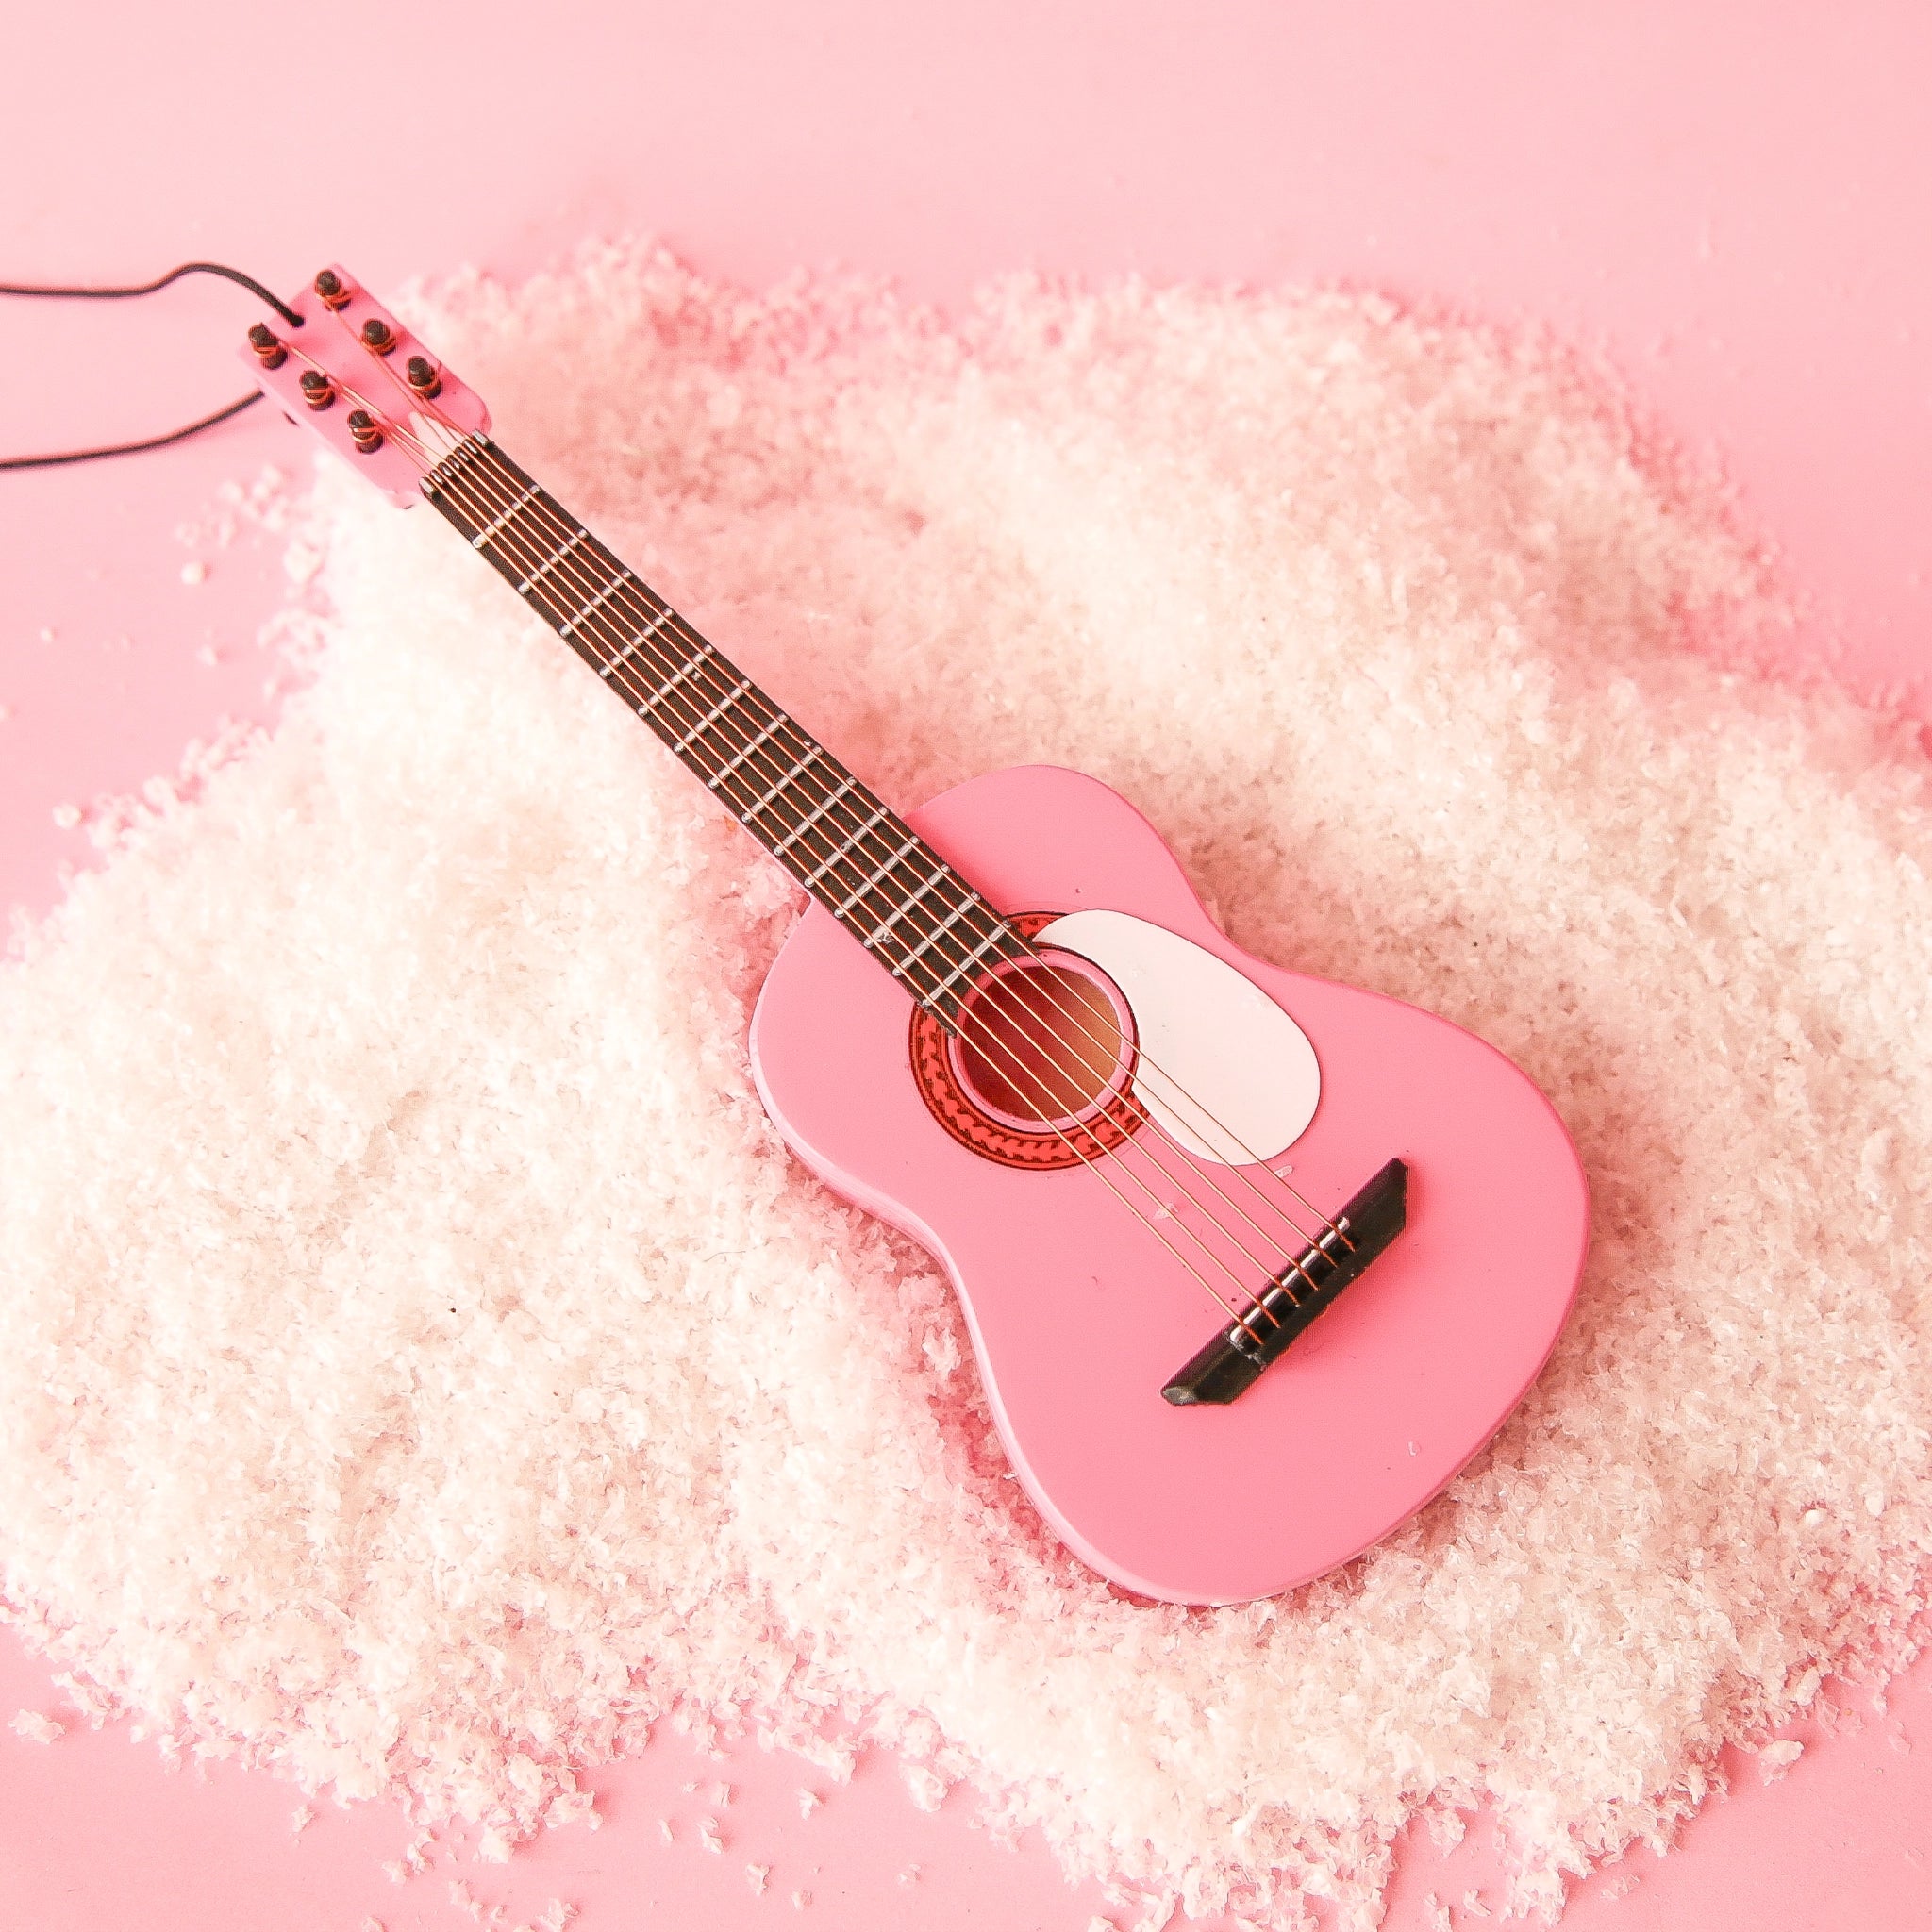 On a pink snowy background is a pink string guitar ornament. 